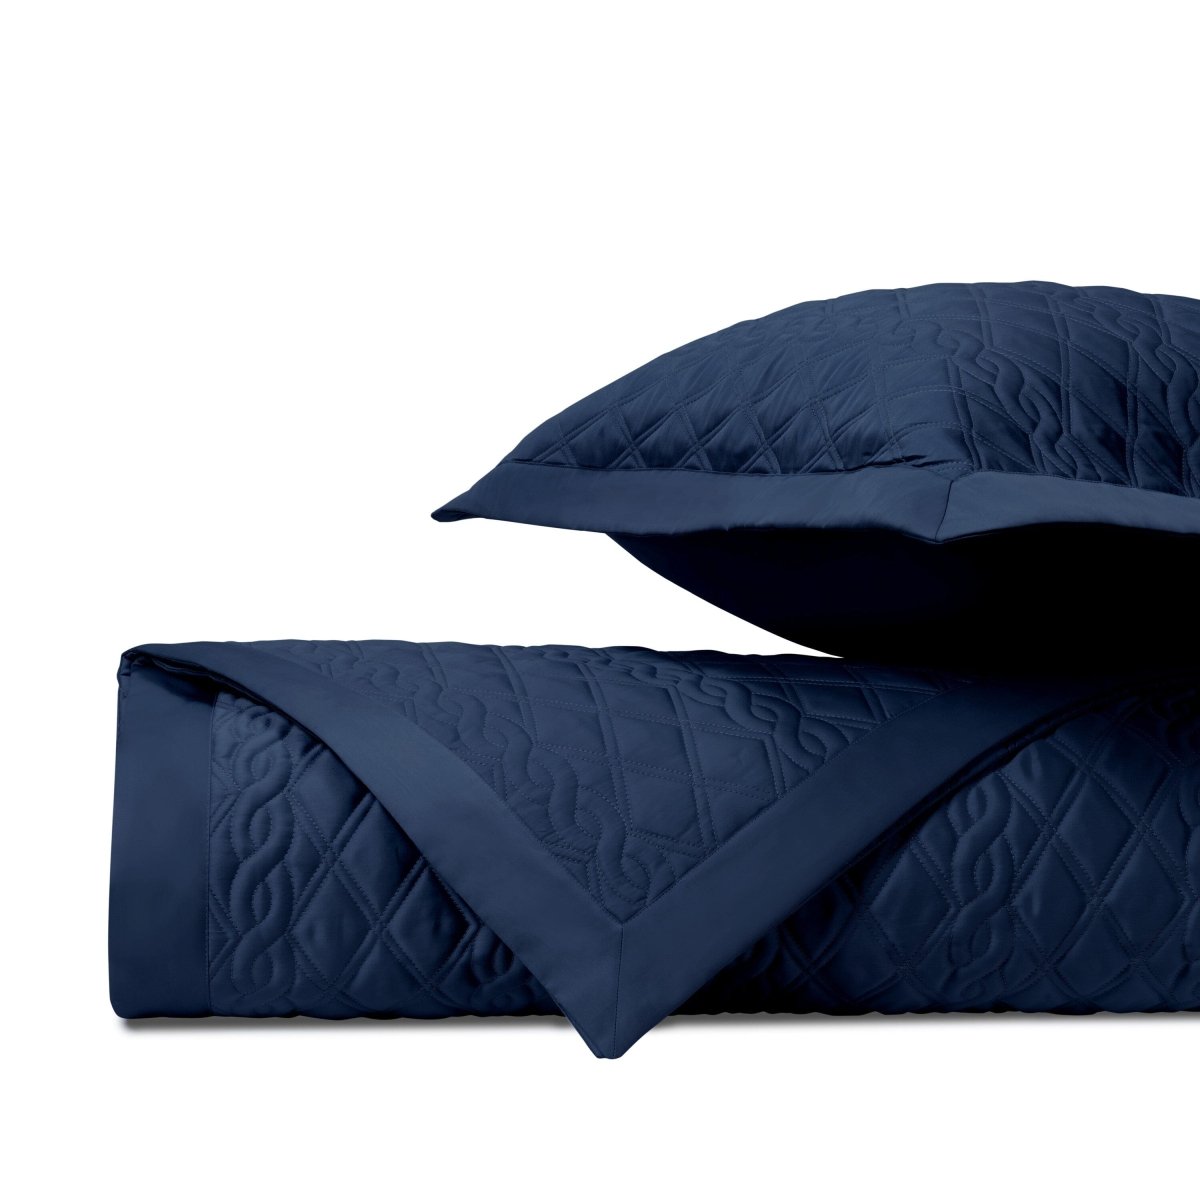 ABBEY Quilted Coverlet in Navy Blue by Home Treasures at Fig Linens and Home